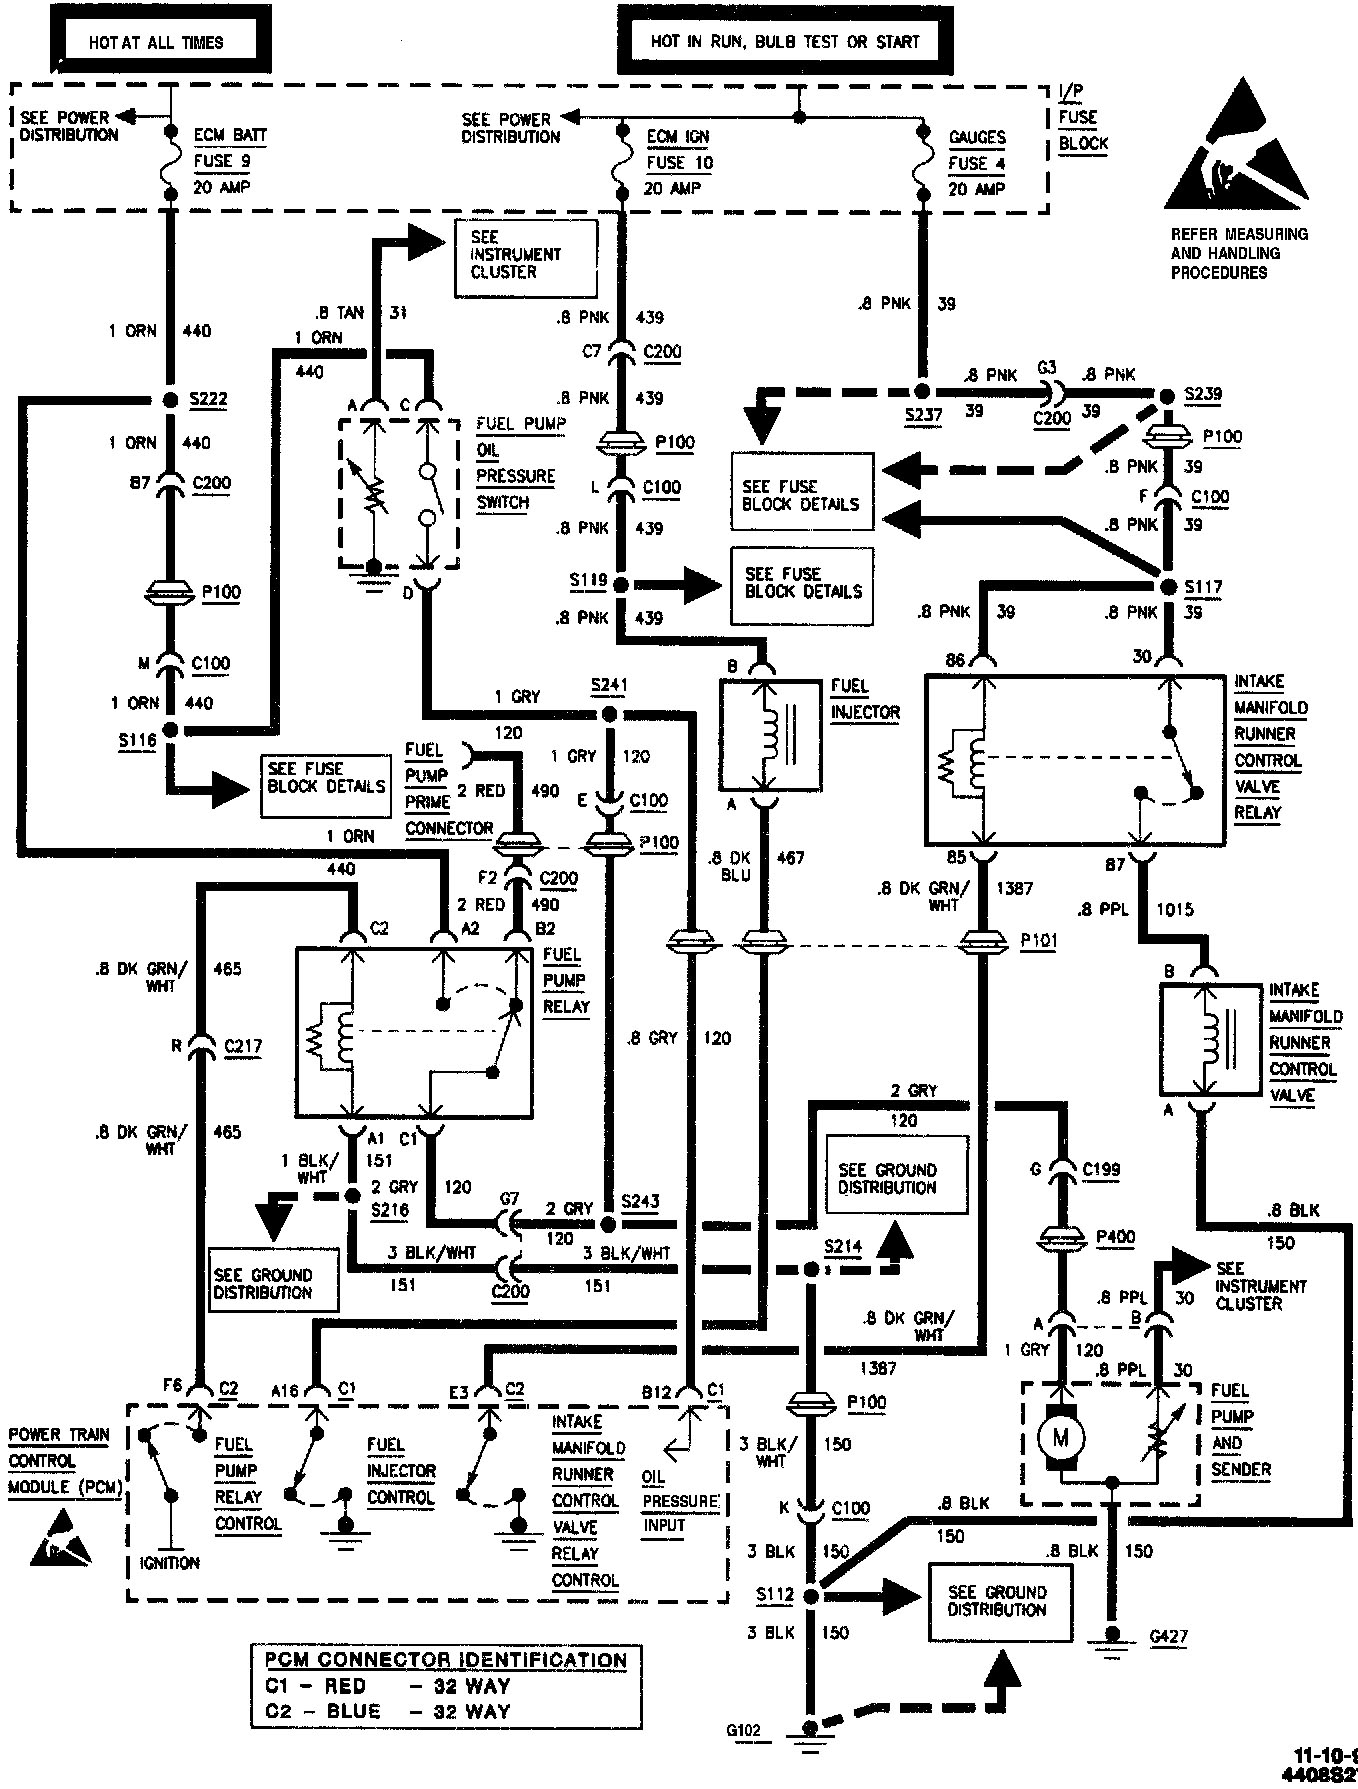 Wiring Diagram For 2001 Chevy S10 - Auto Electrical Wiring Diagram